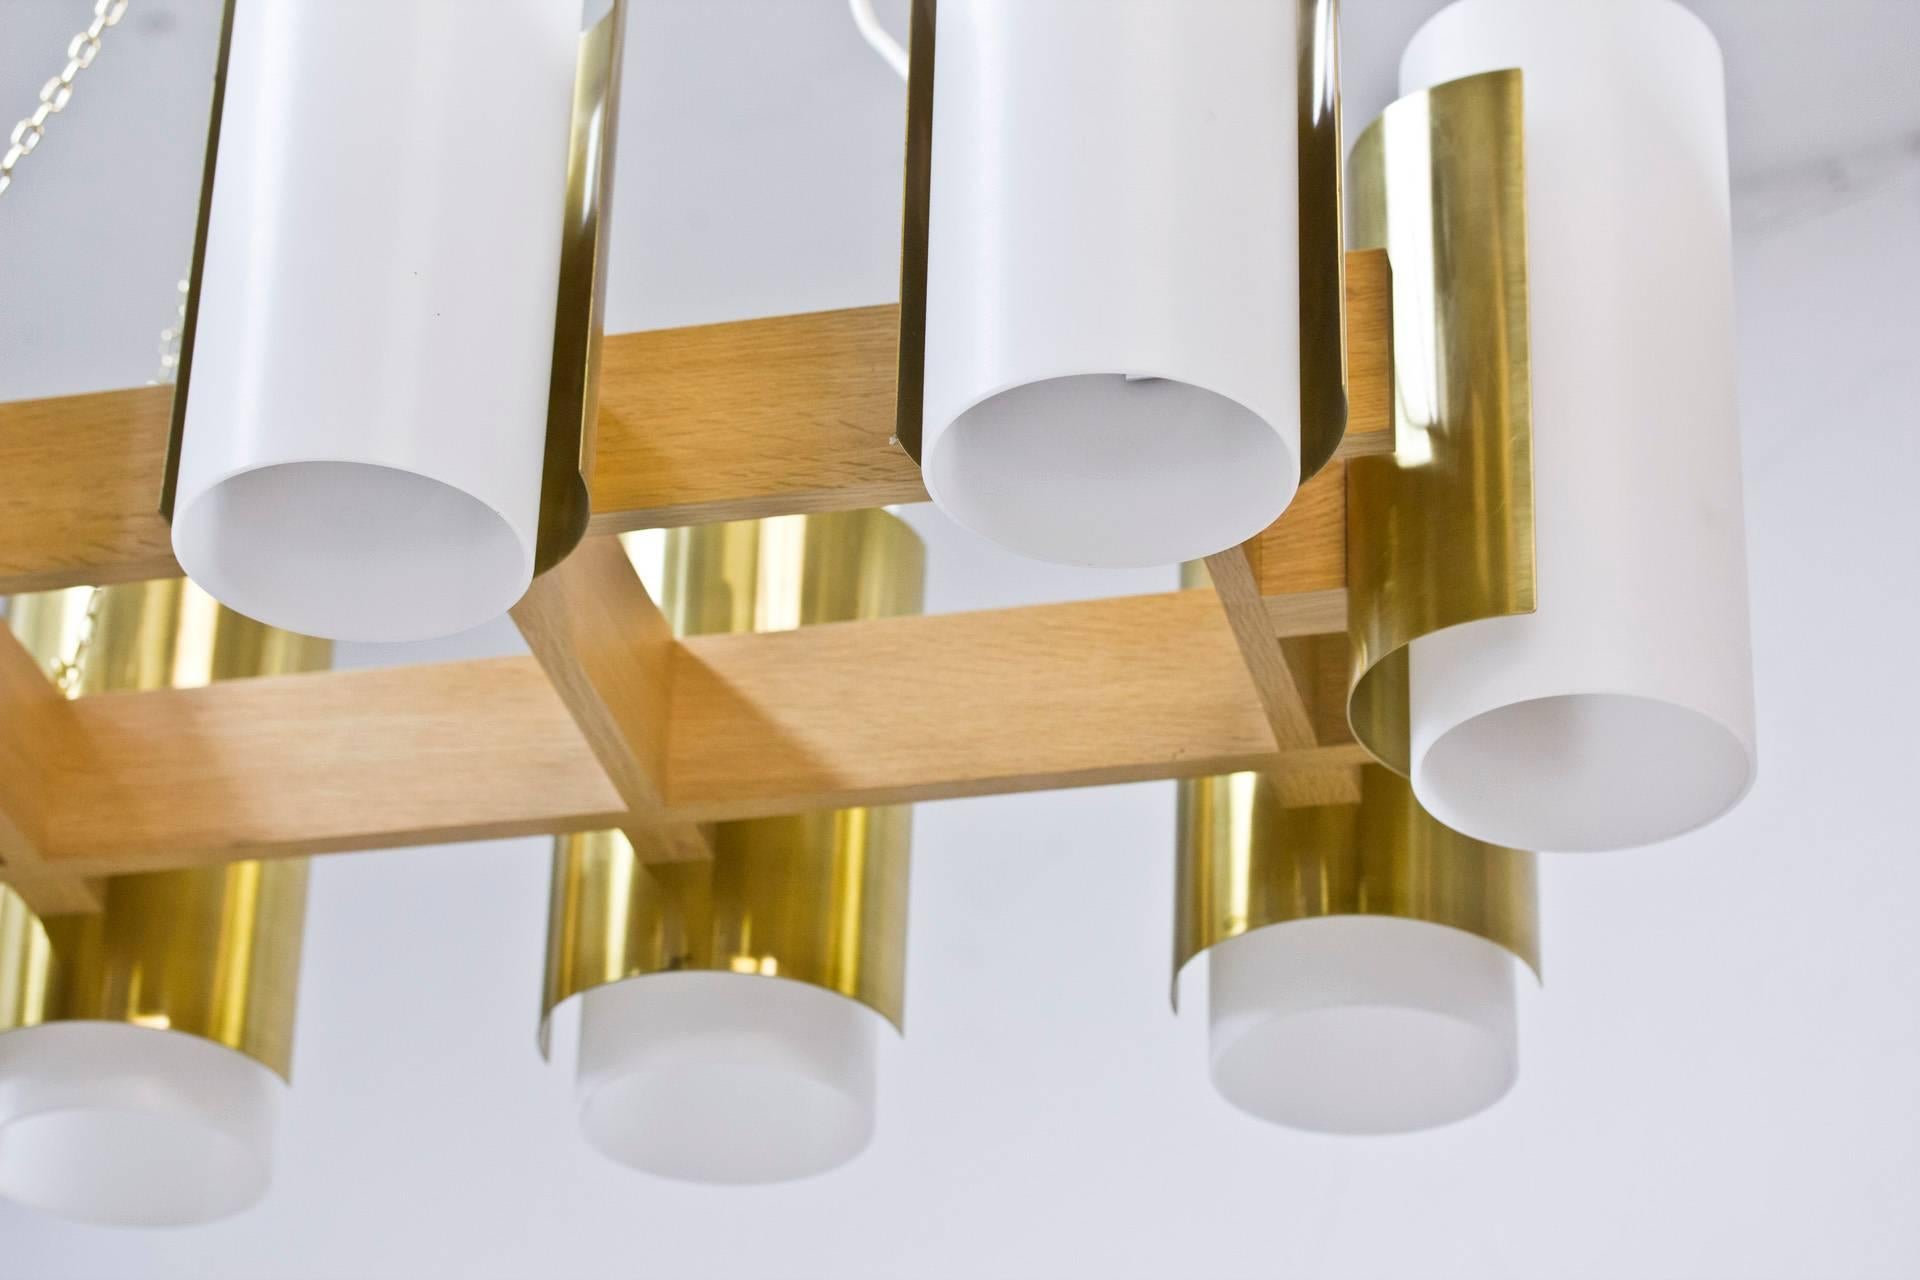 Mid-20th Century 1950s Chandeliers in Oak and Brass by Sten Carlquist, for Hans Agne Jakobsson For Sale